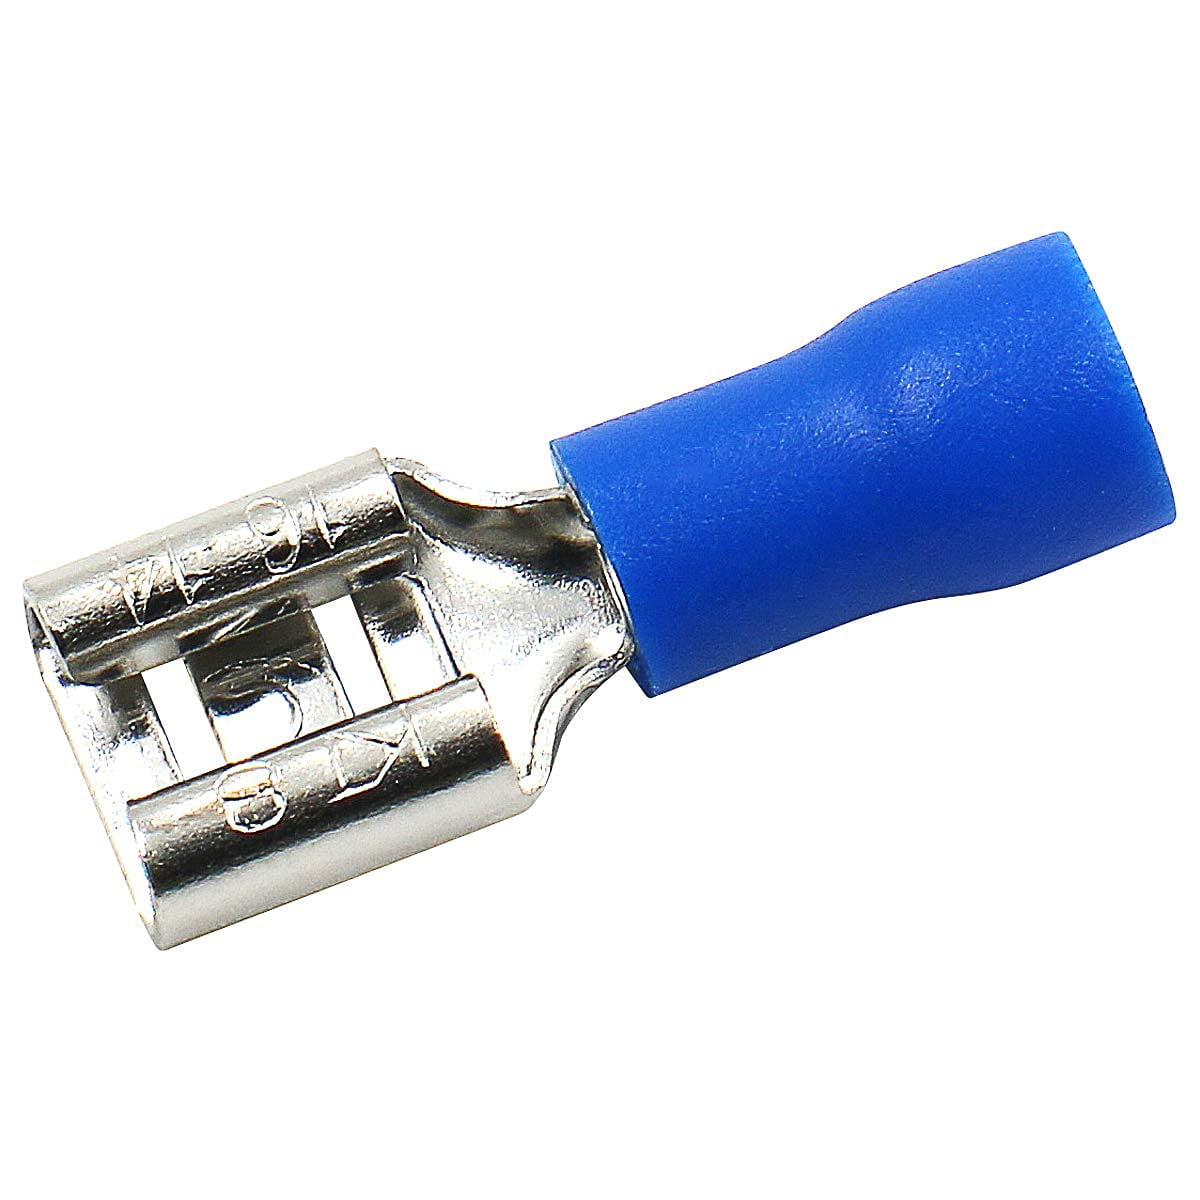 50 x Blue 6.3mm Female Insulated Crimp Spade Connector 